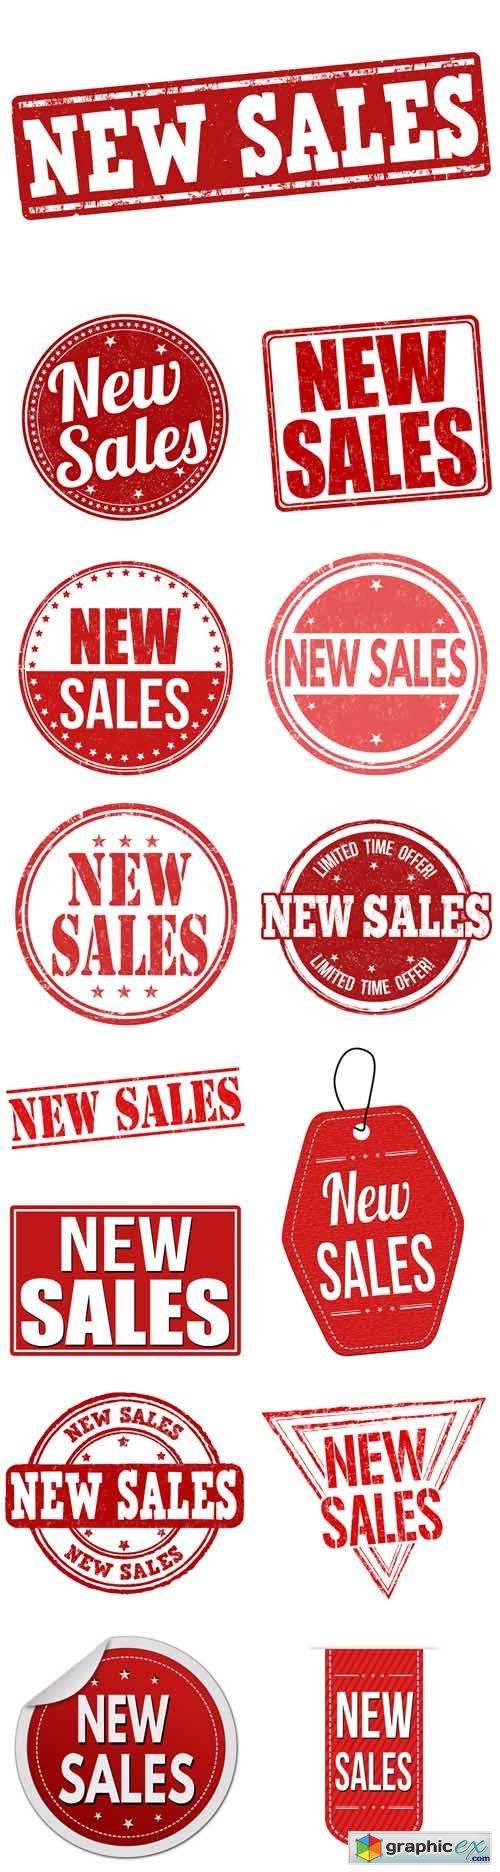 New Sales Stamps